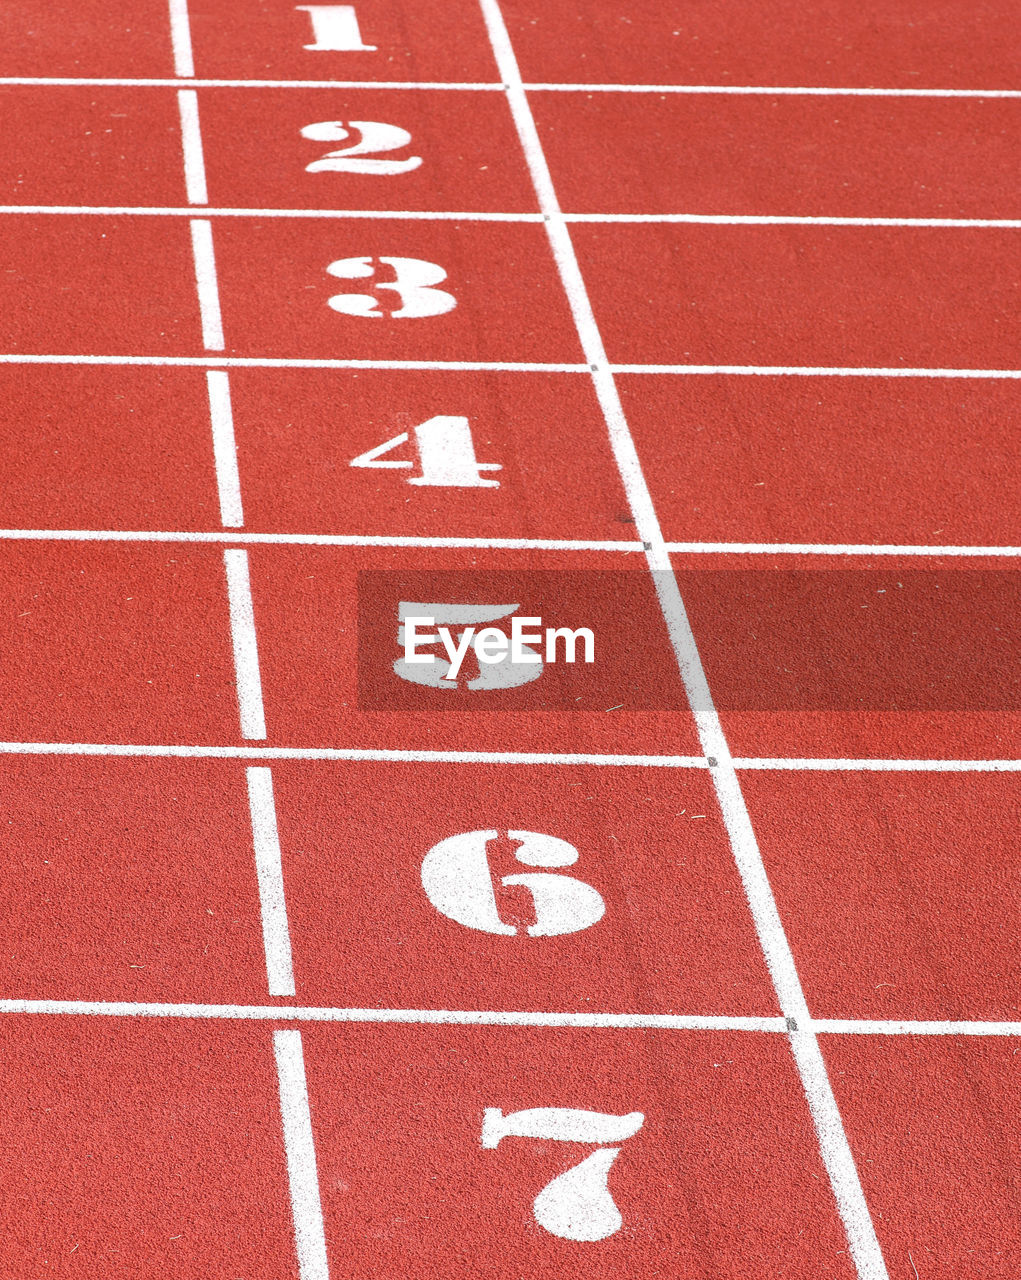 Numbers from one to seven of the athletics track lane before the speed race arrives